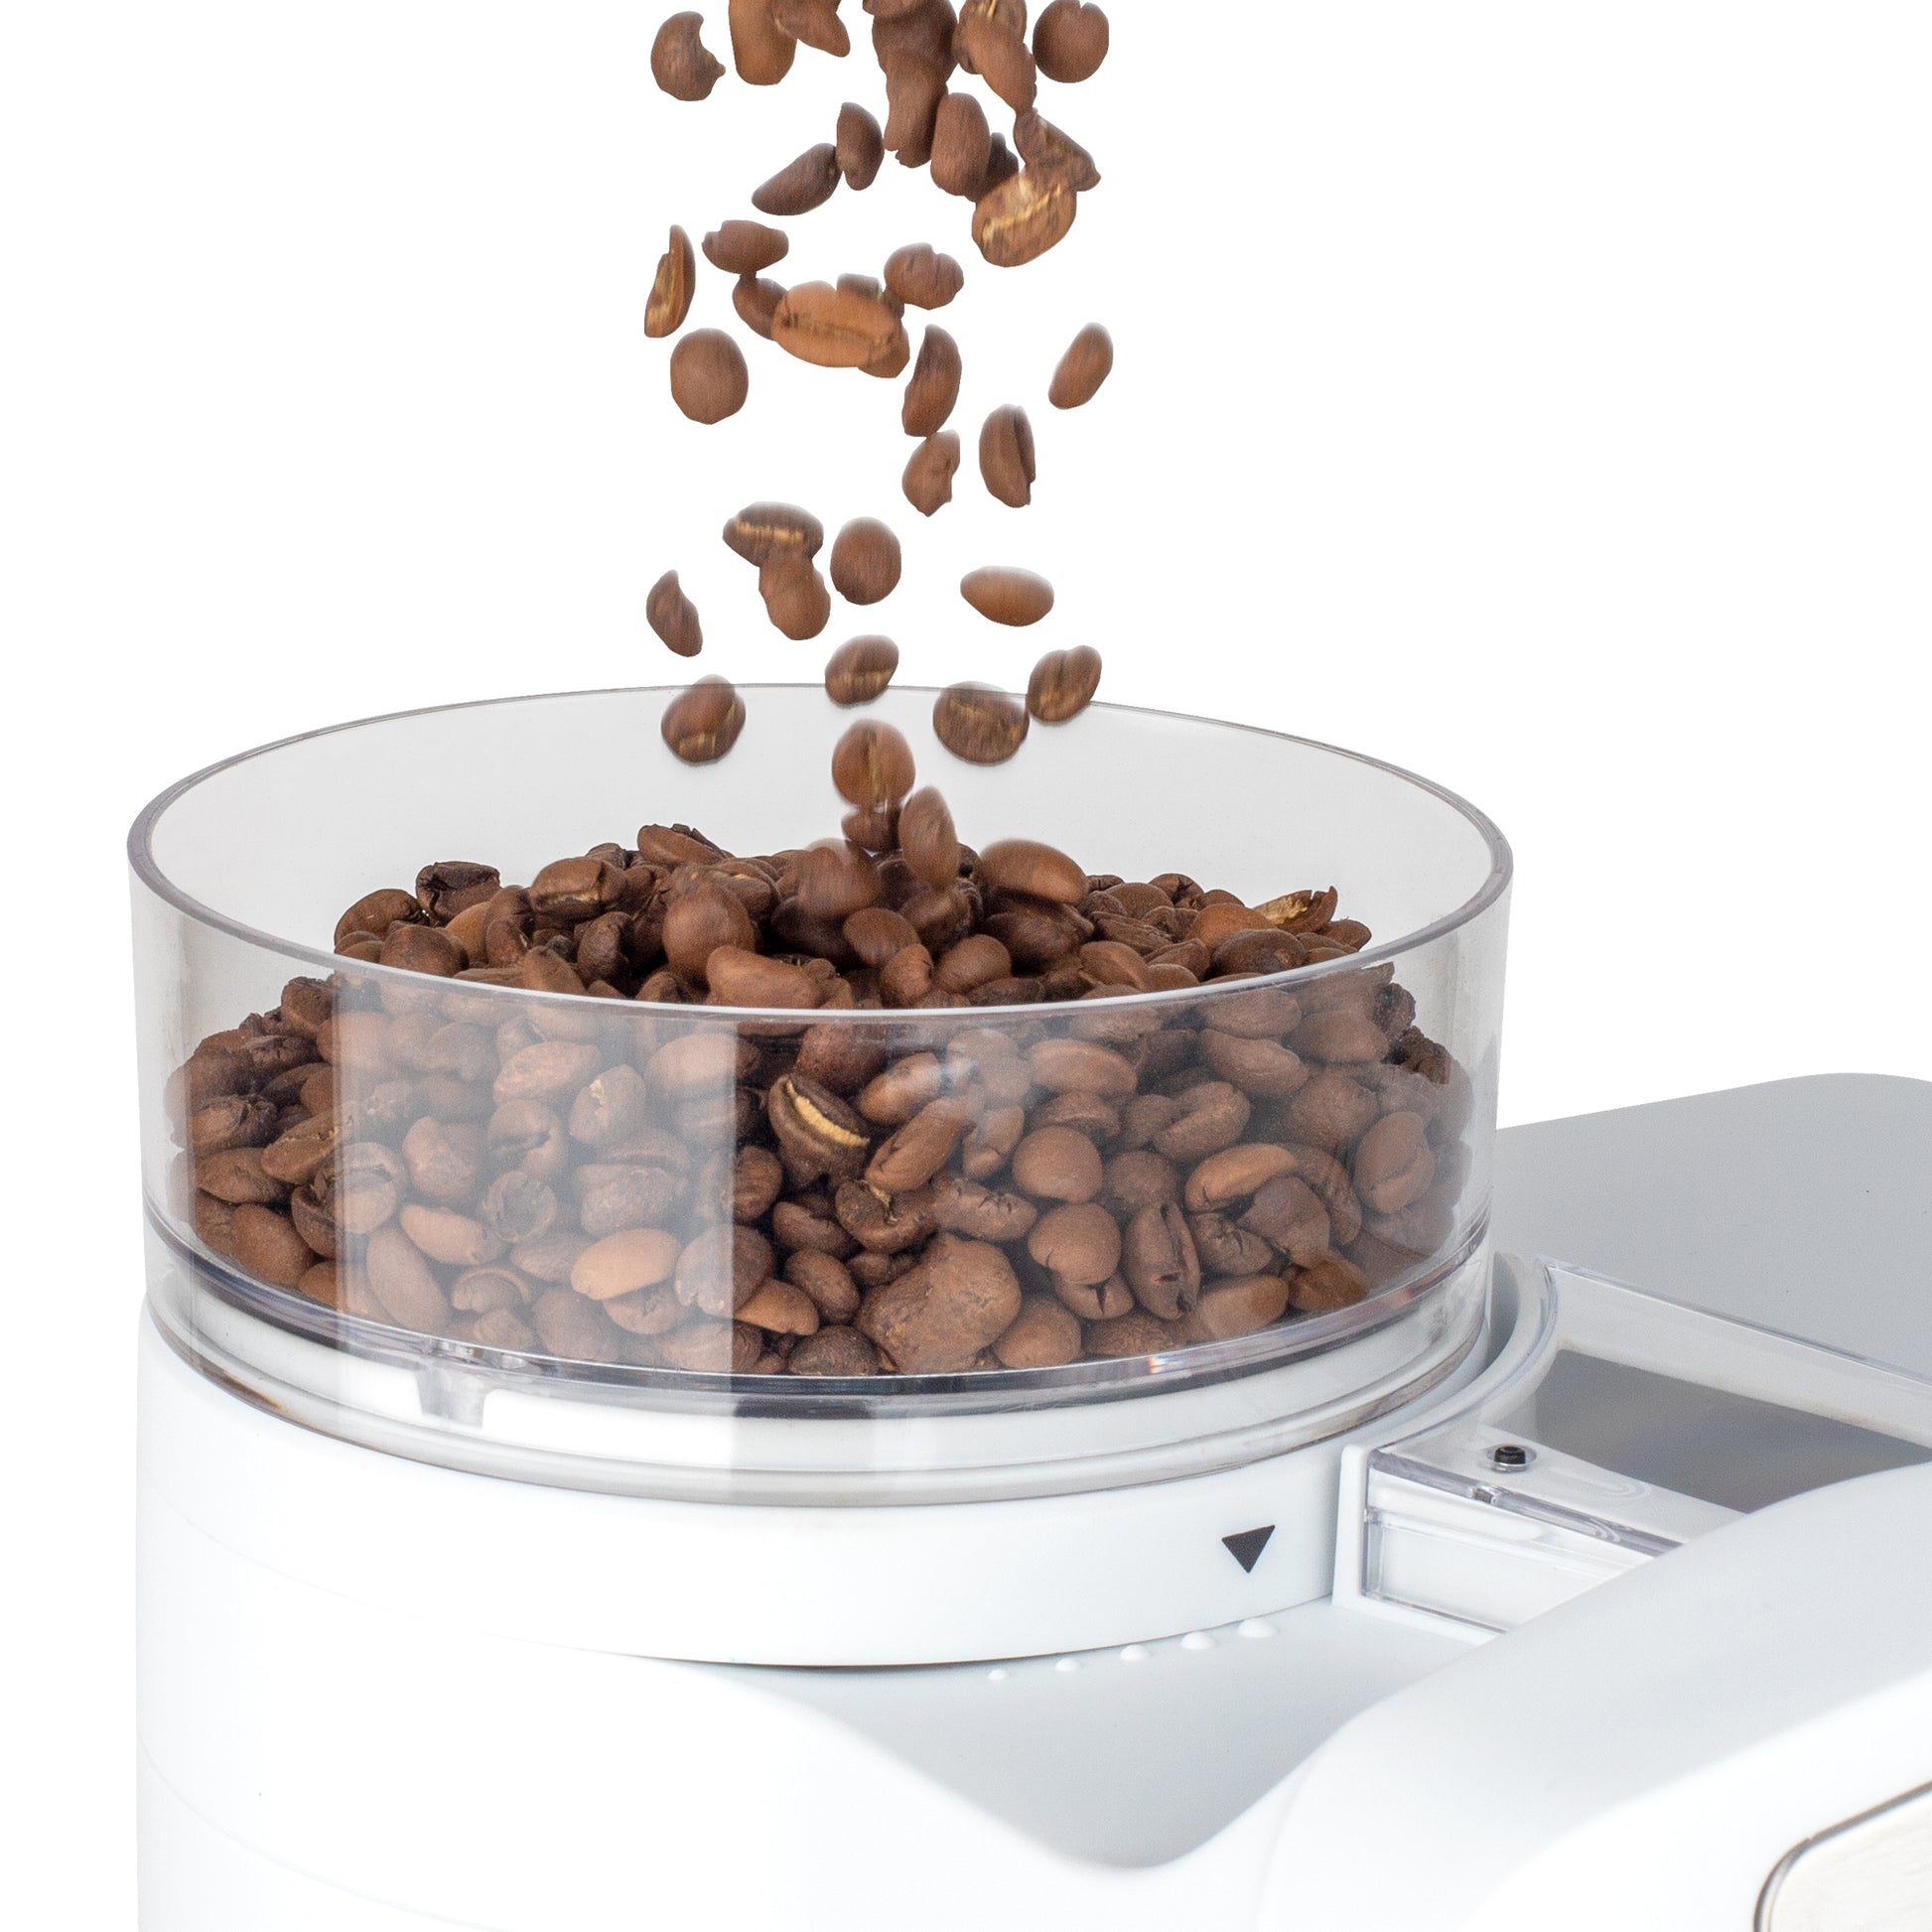 OXO Conical Burr Grinder - Coffee grinders - illy Shop